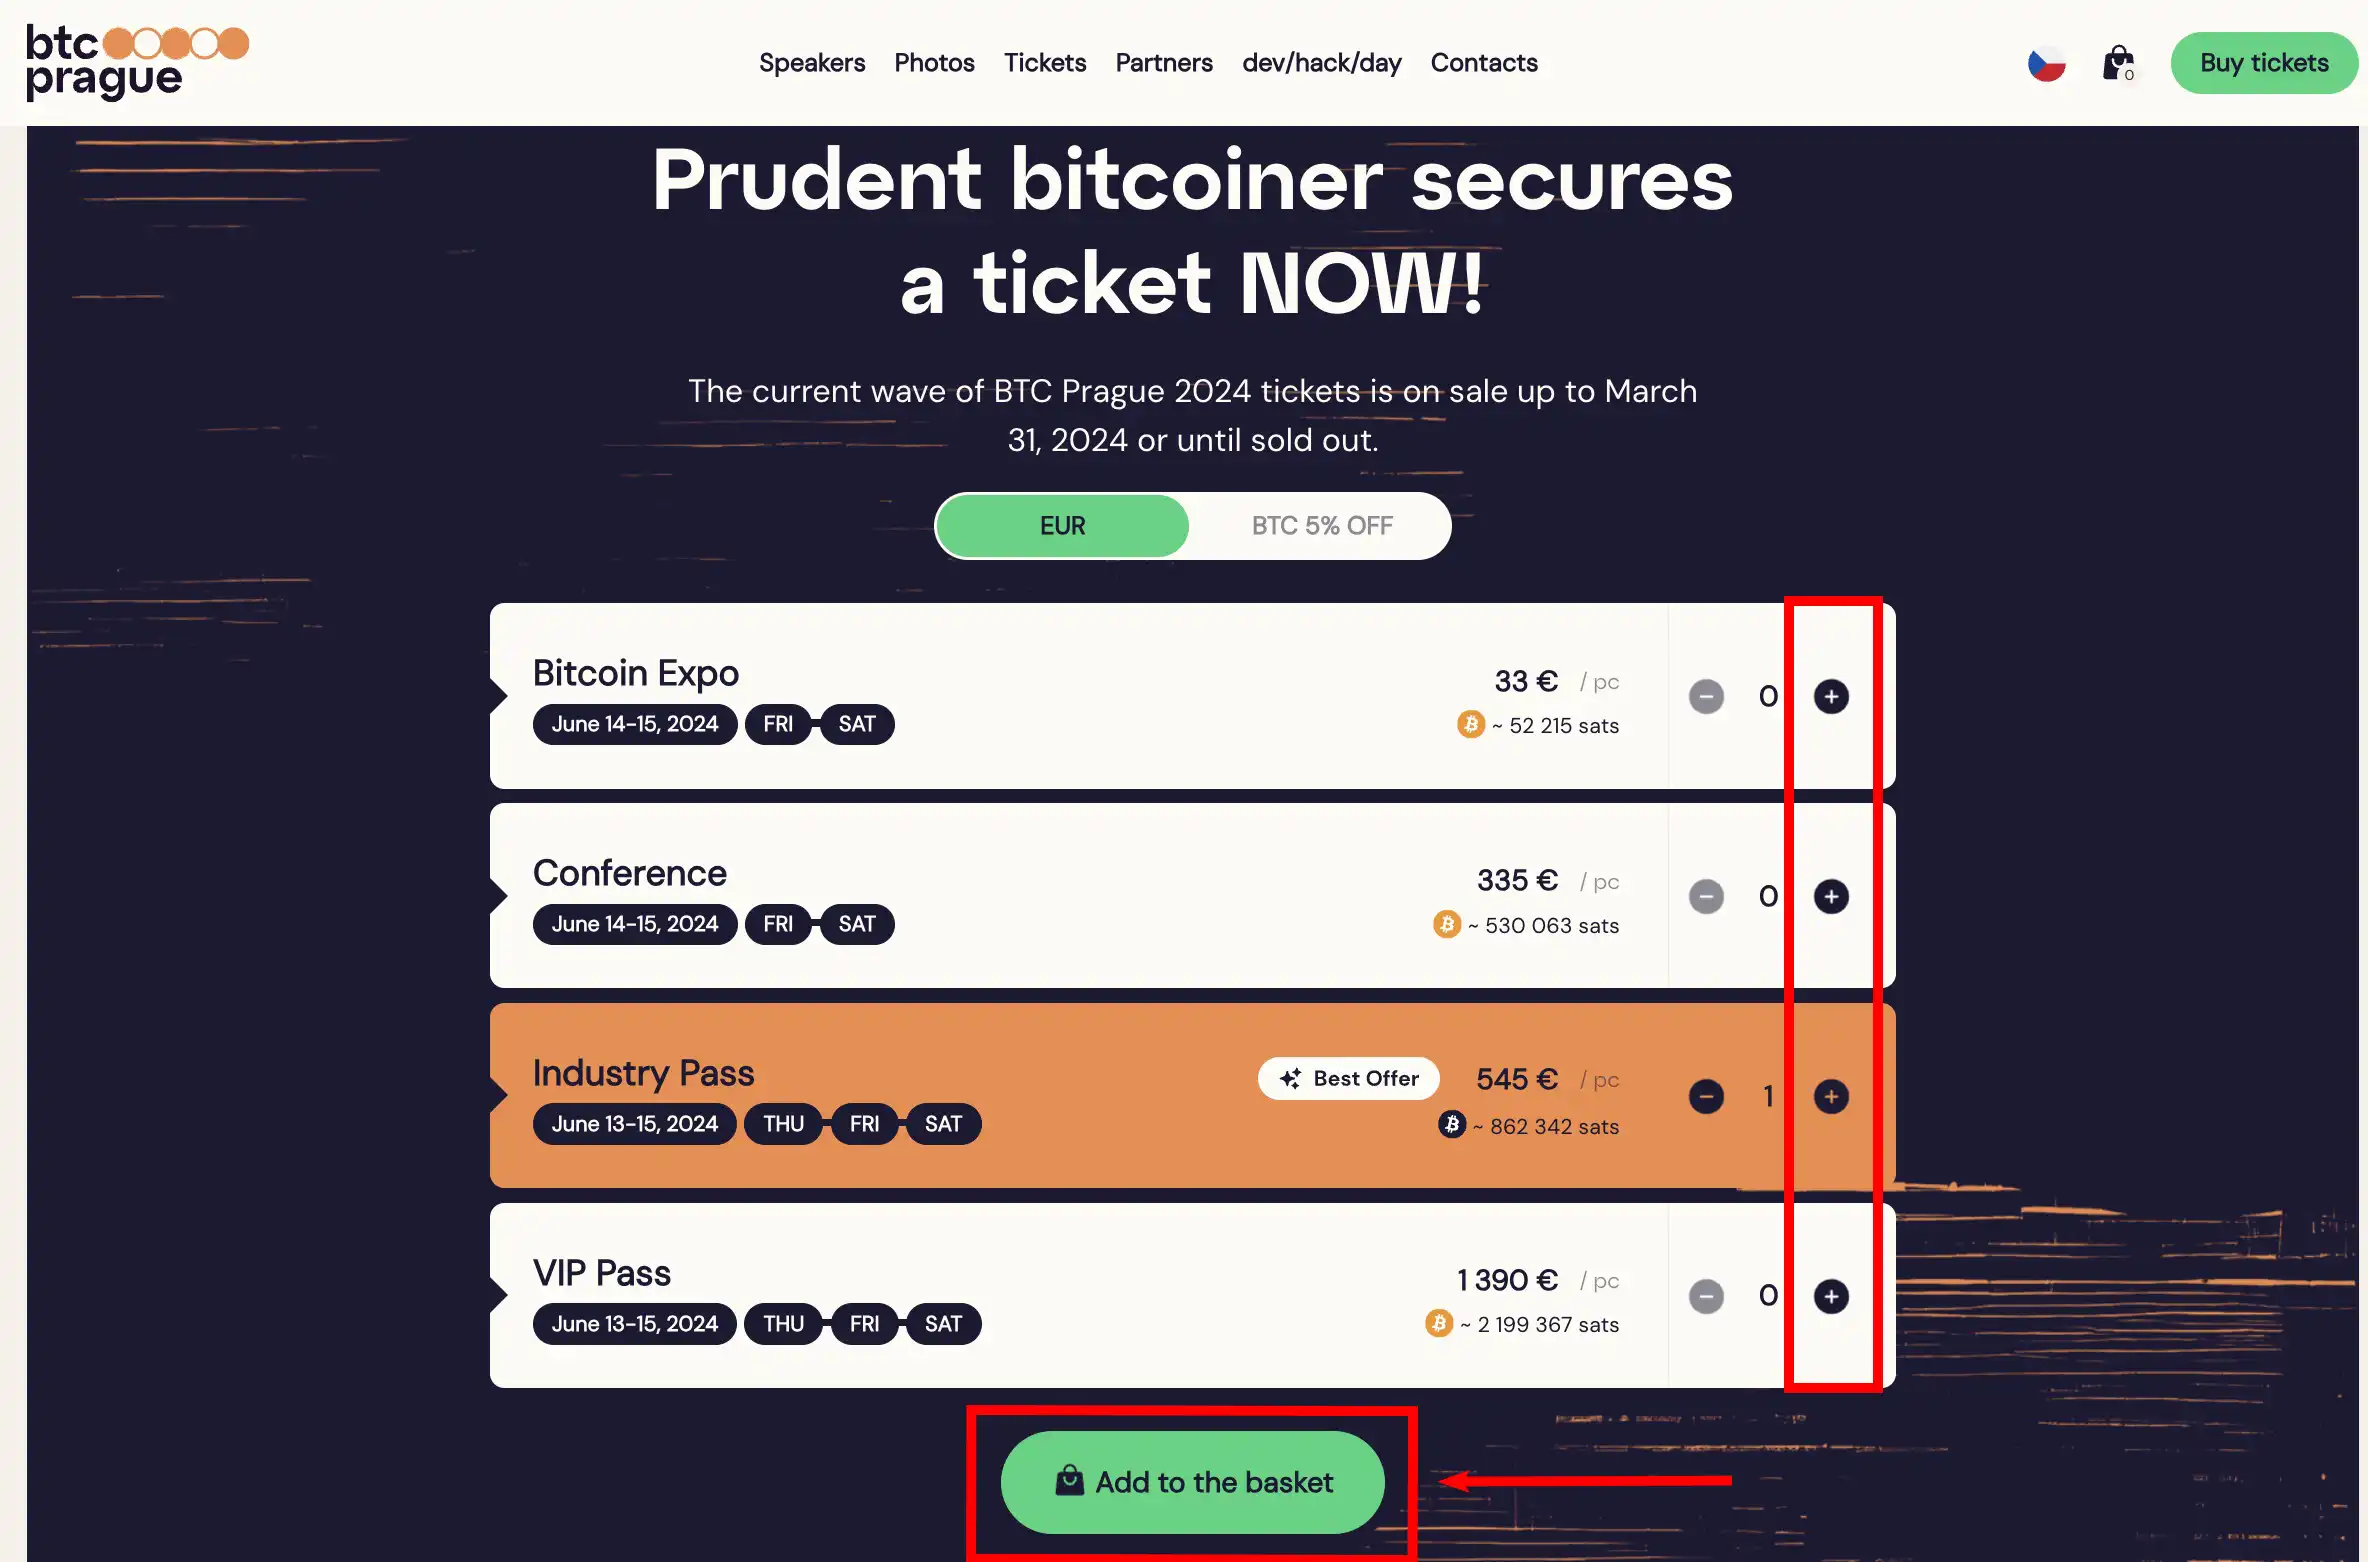 How To Get 10% Off on Your BTC Prague Ticket Purchase Step 2